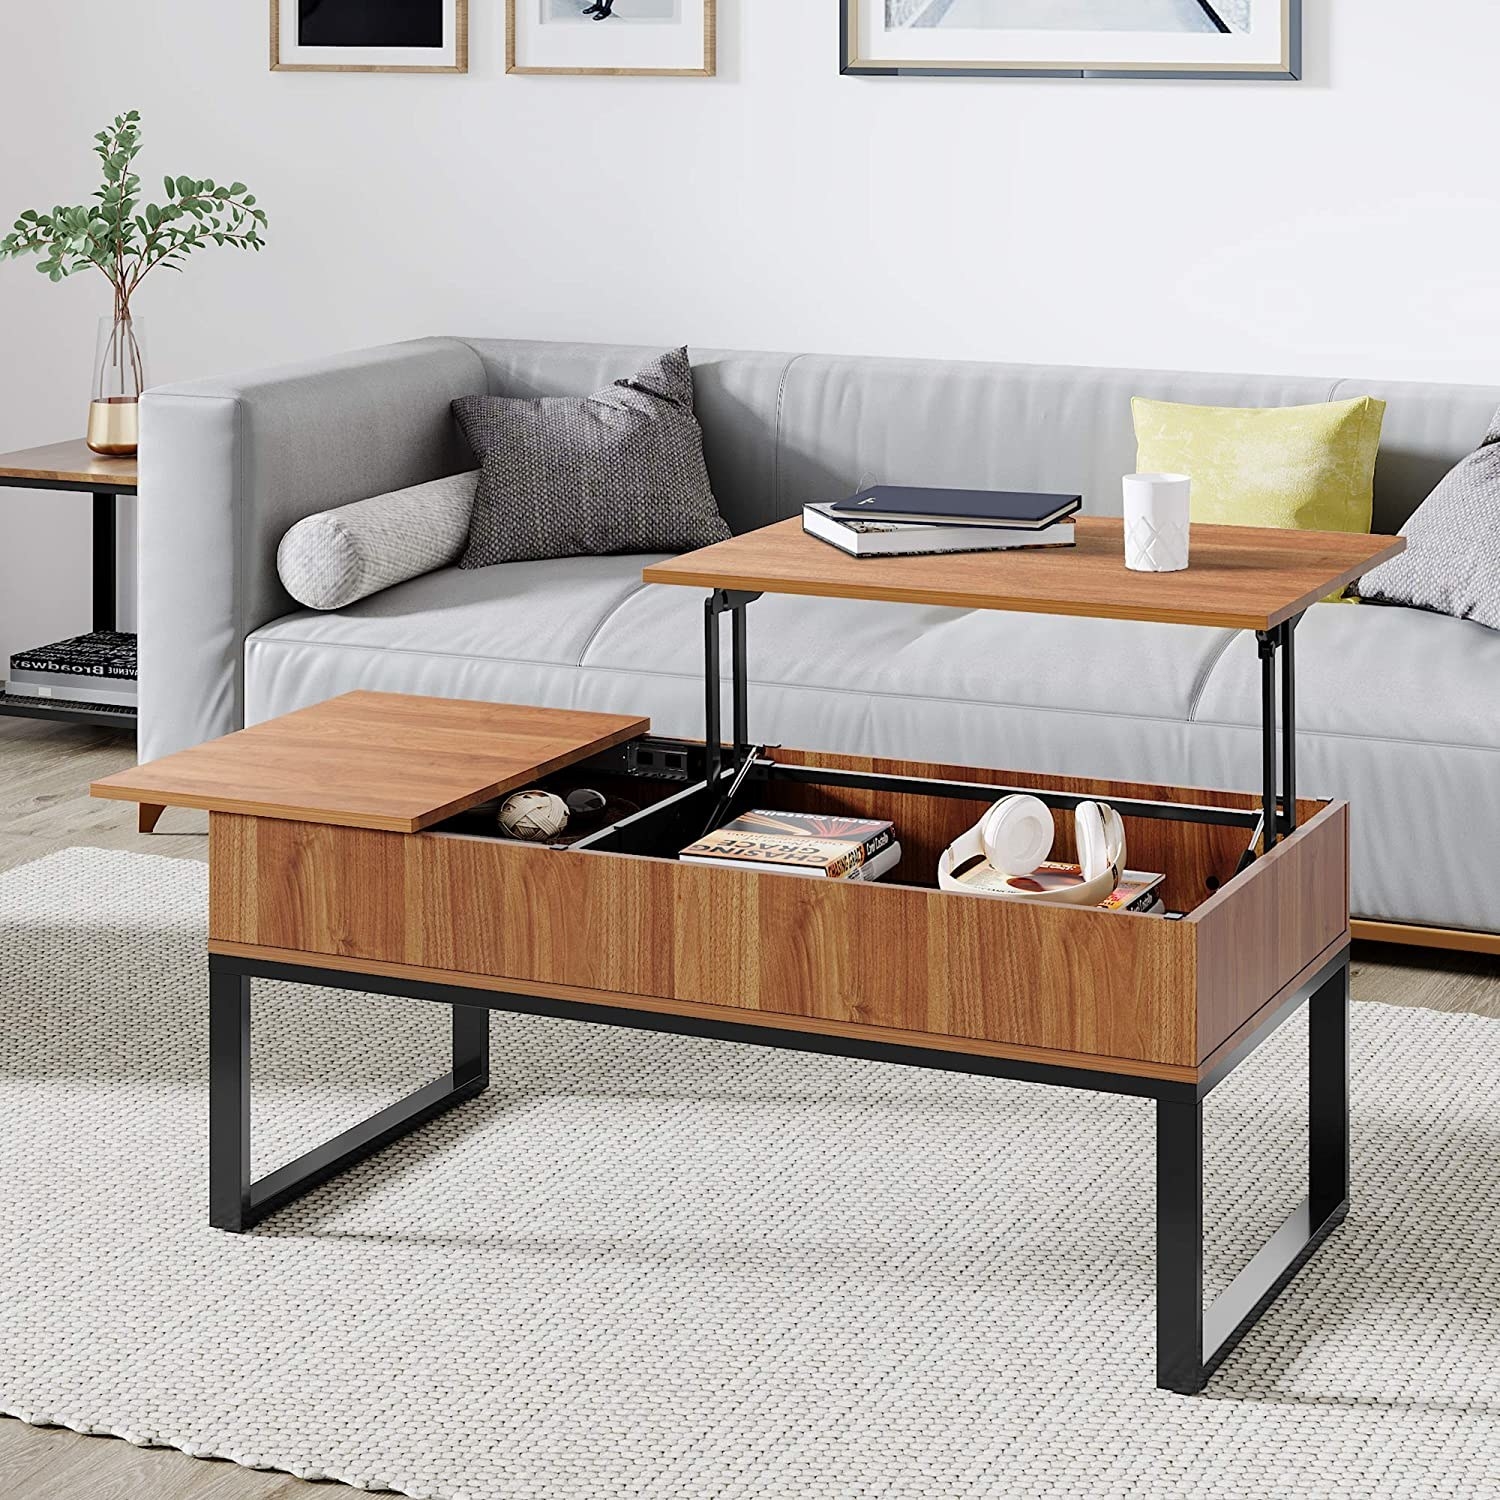 the WLIVE Wood Lift Top Coffee Table with Hidden Storage Compartment in a living room